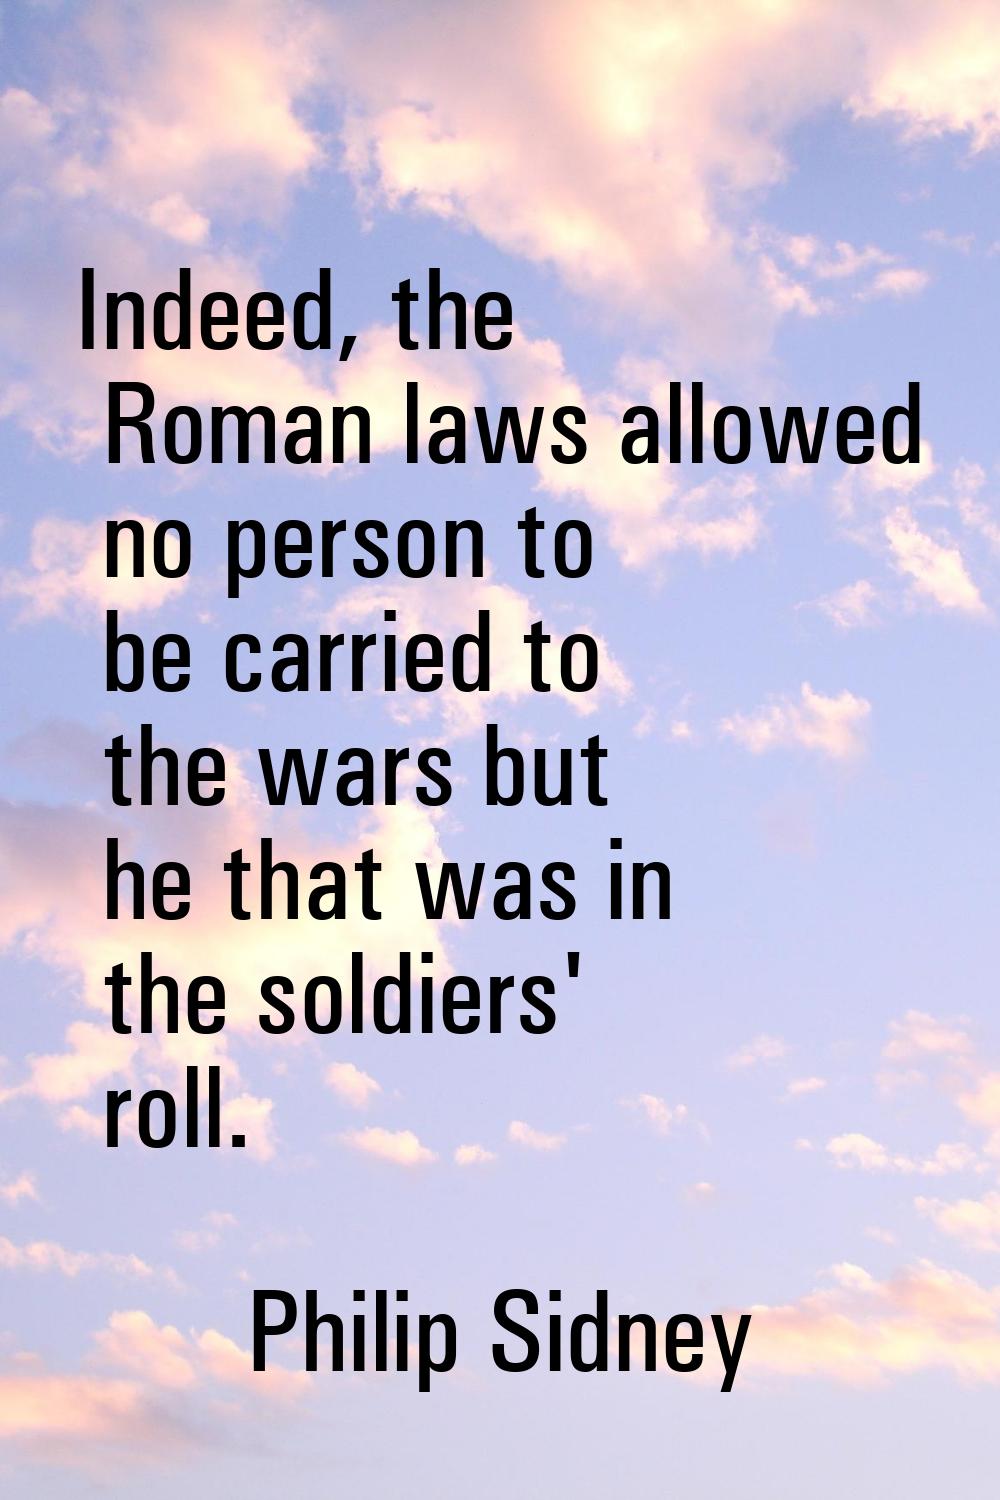 Indeed, the Roman laws allowed no person to be carried to the wars but he that was in the soldiers'